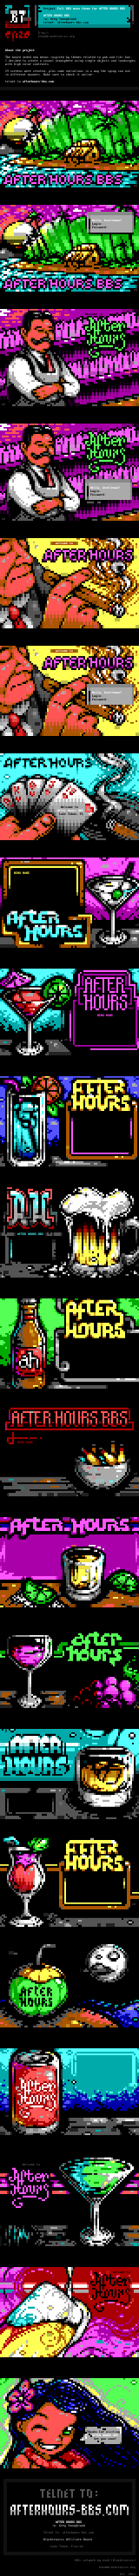 after hours theme set by enzo